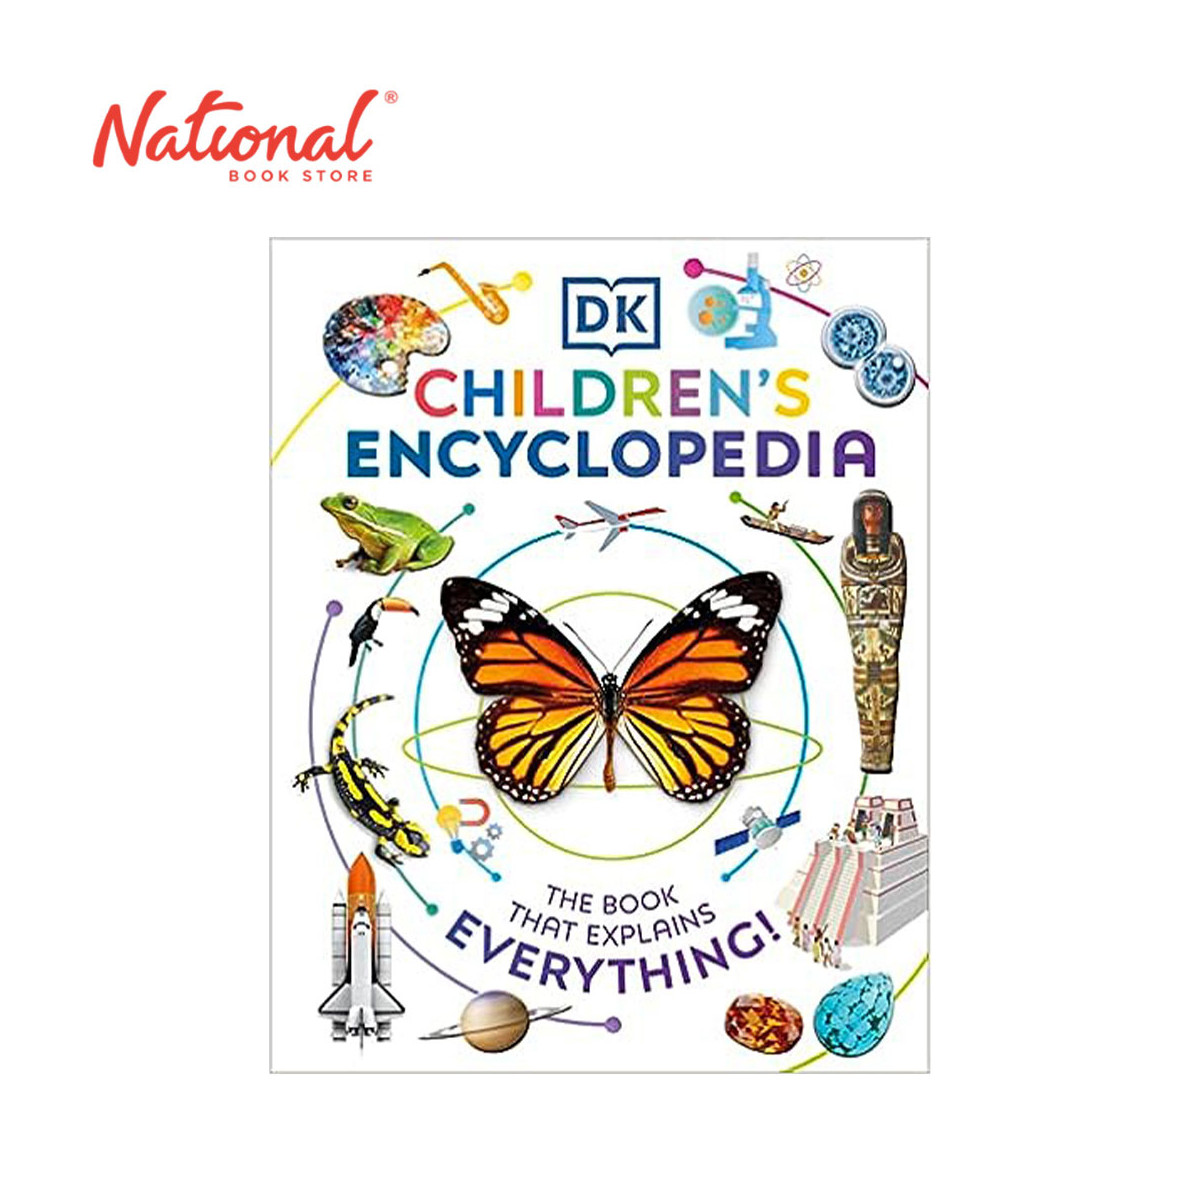 DK Children's Encyclopedia: The Book That Explains Everything - Hardcover - Children's Reference